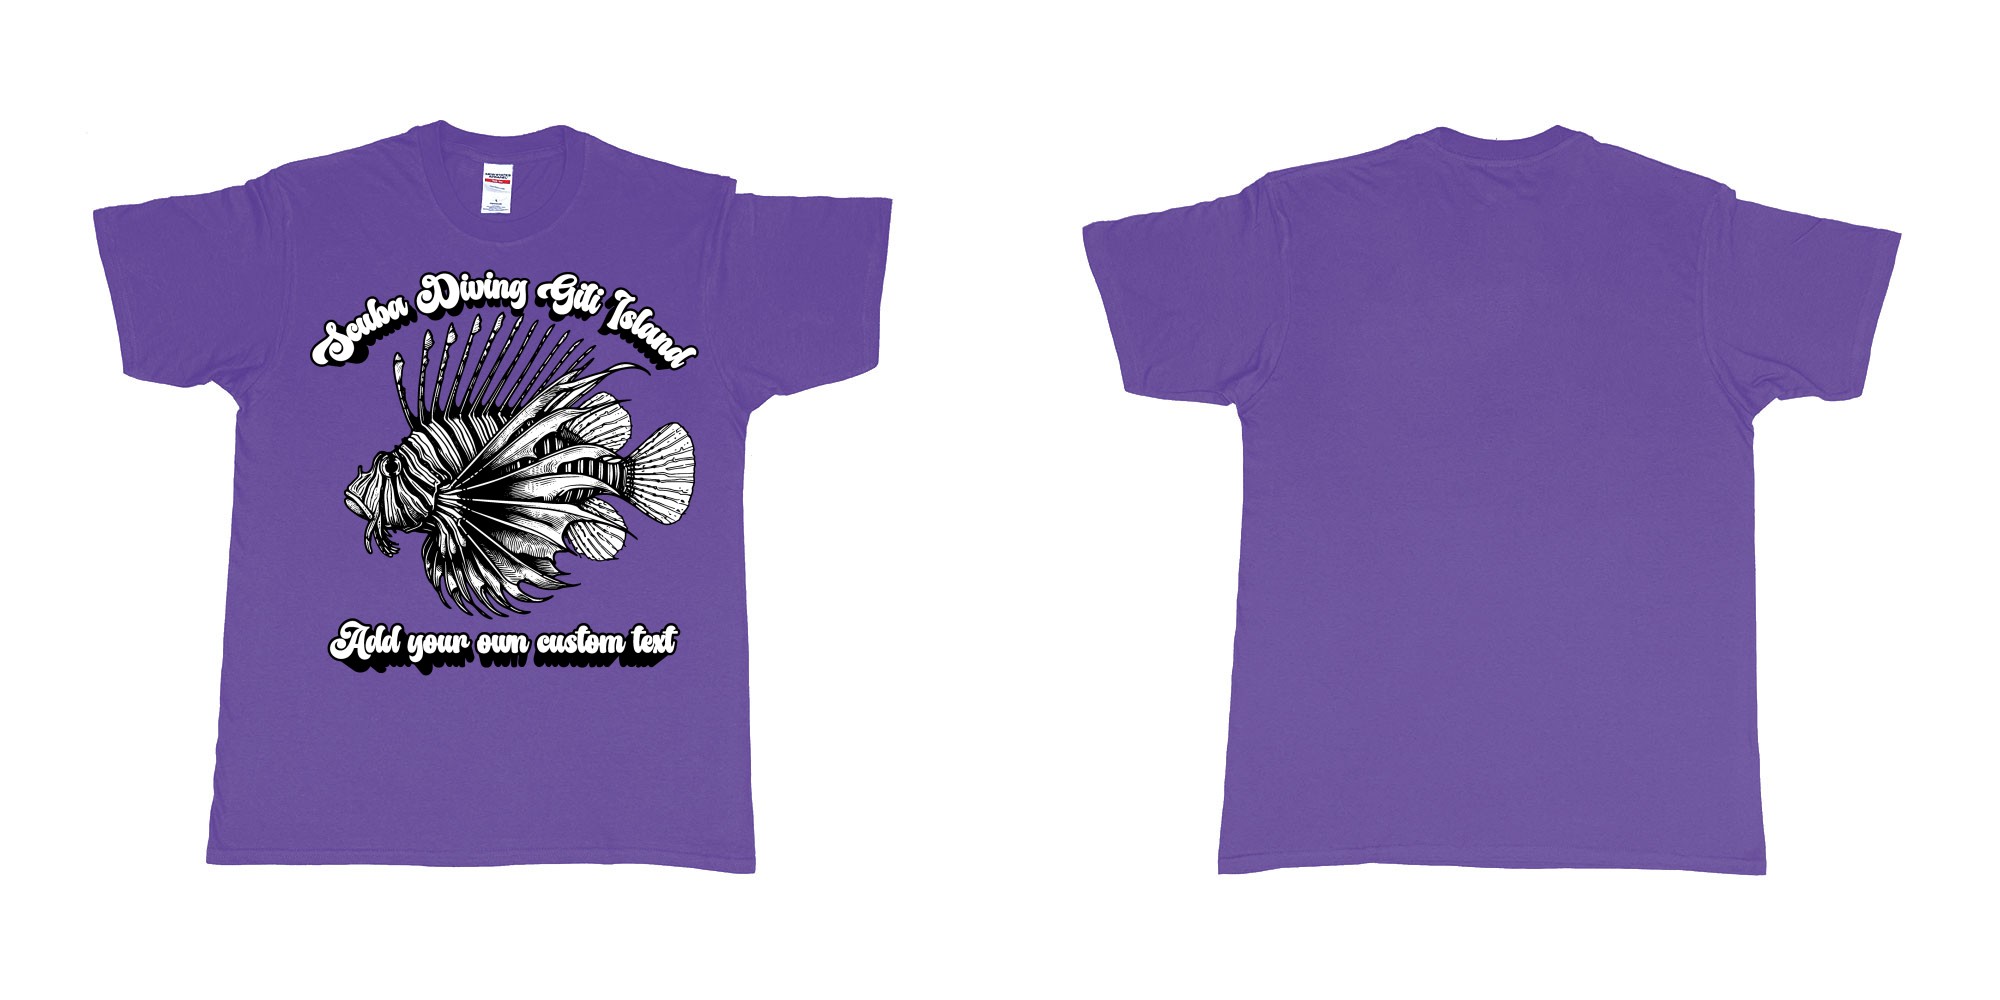 Custom tshirt design lion fish scuba diving gili islands custom print in fabric color purple choice your own text made in Bali by The Pirate Way